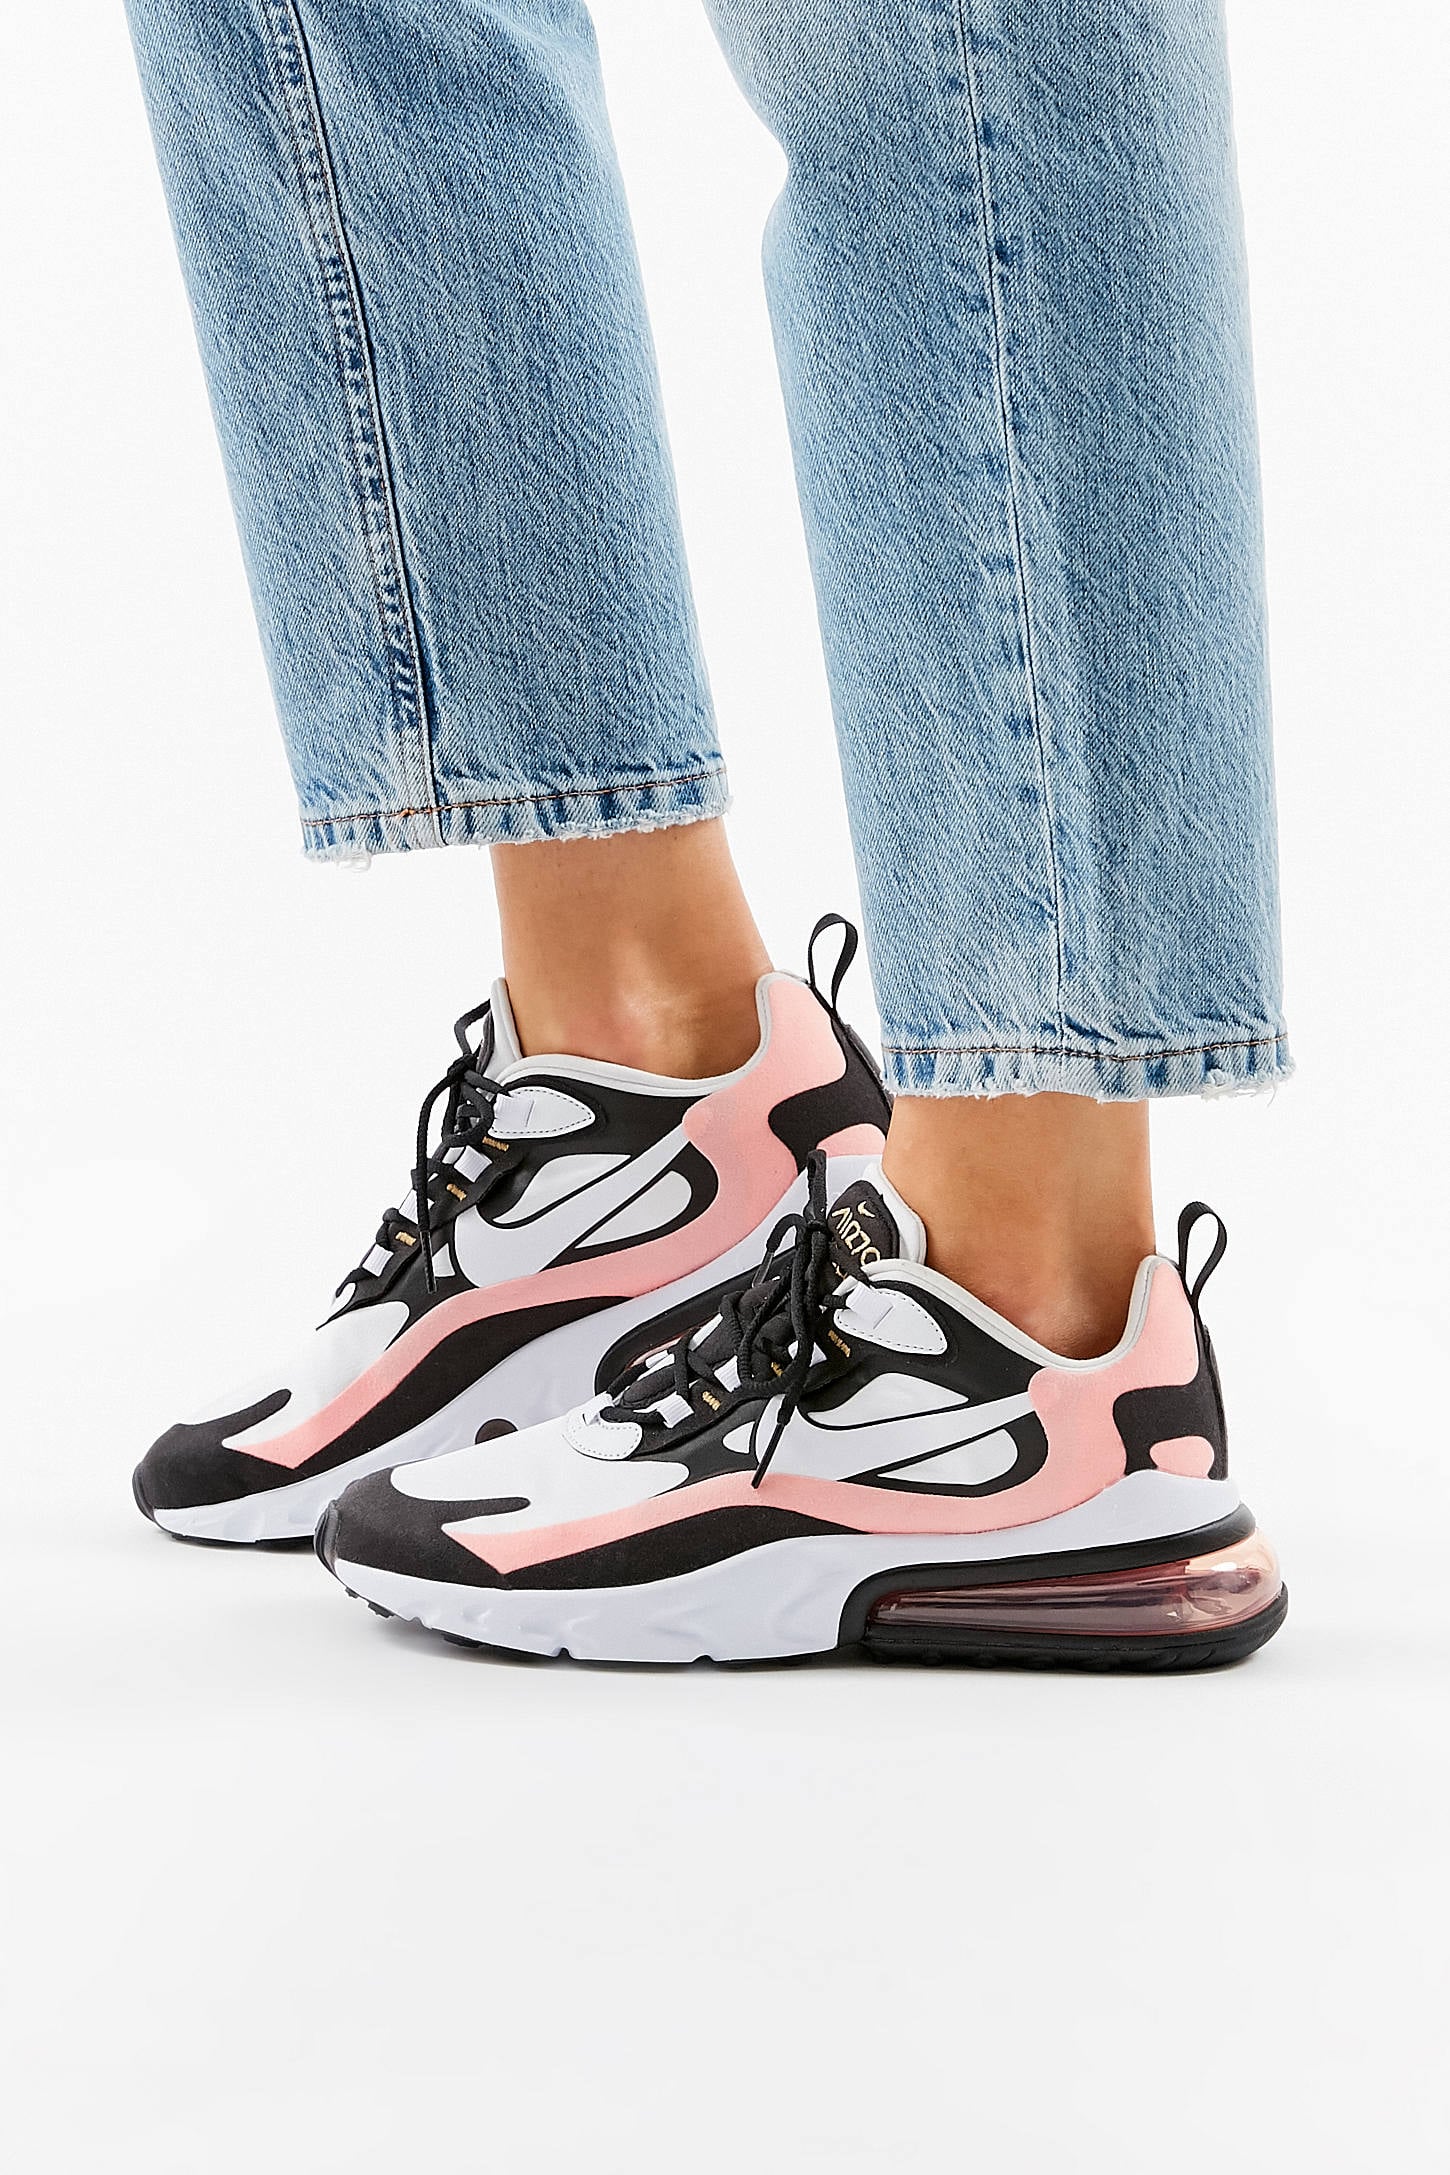 air max 270 womens outfit